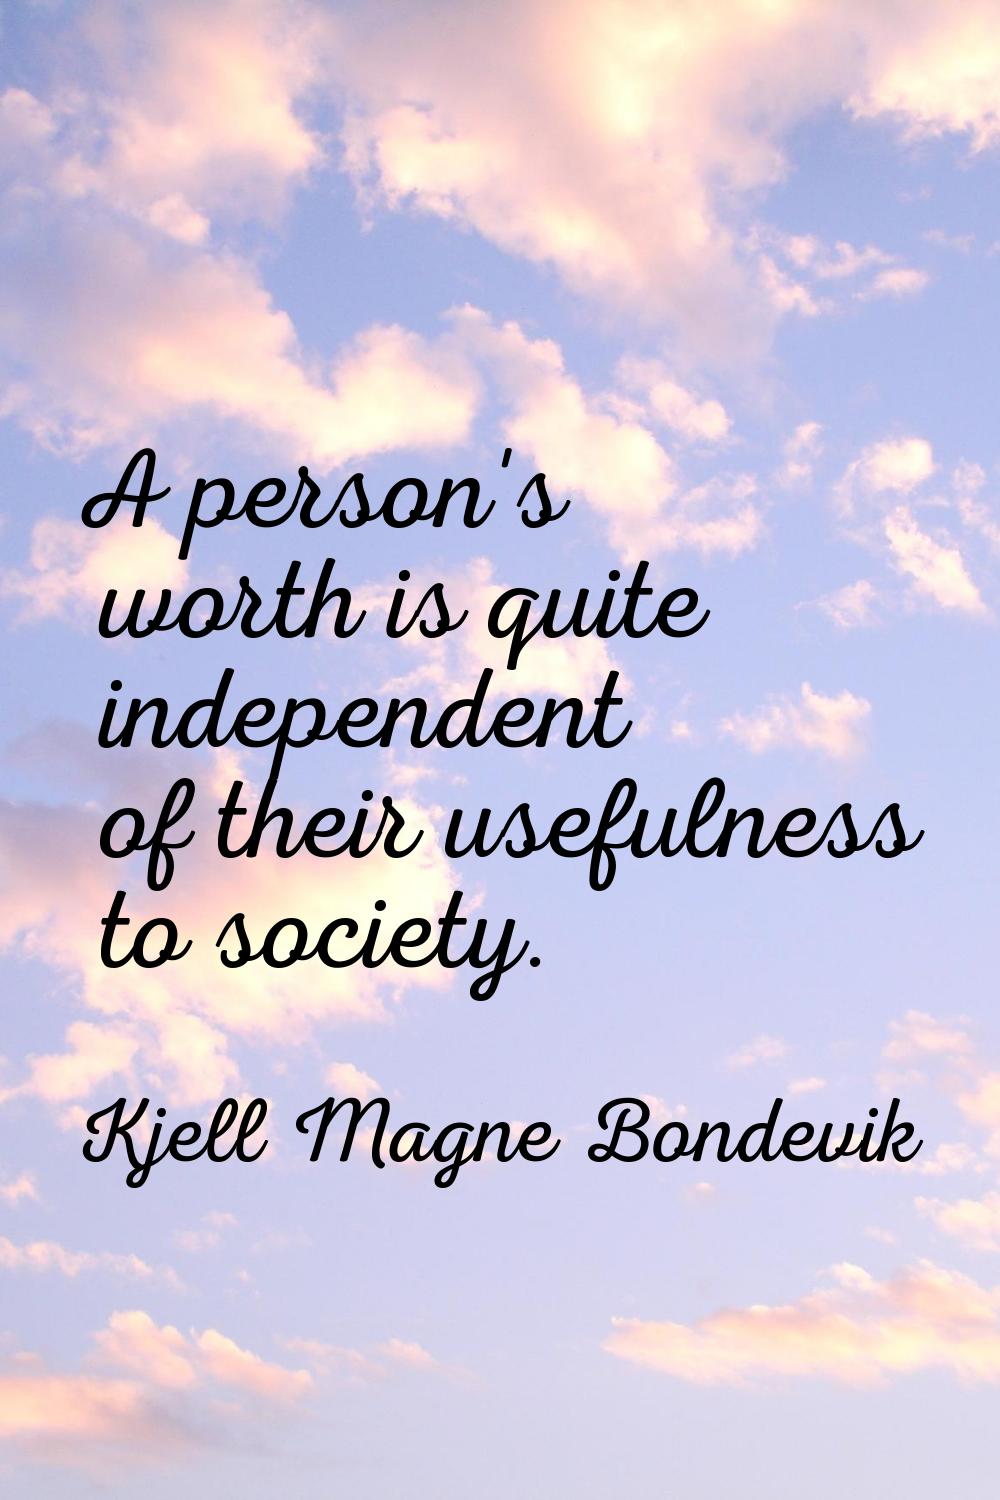 A person's worth is quite independent of their usefulness to society.